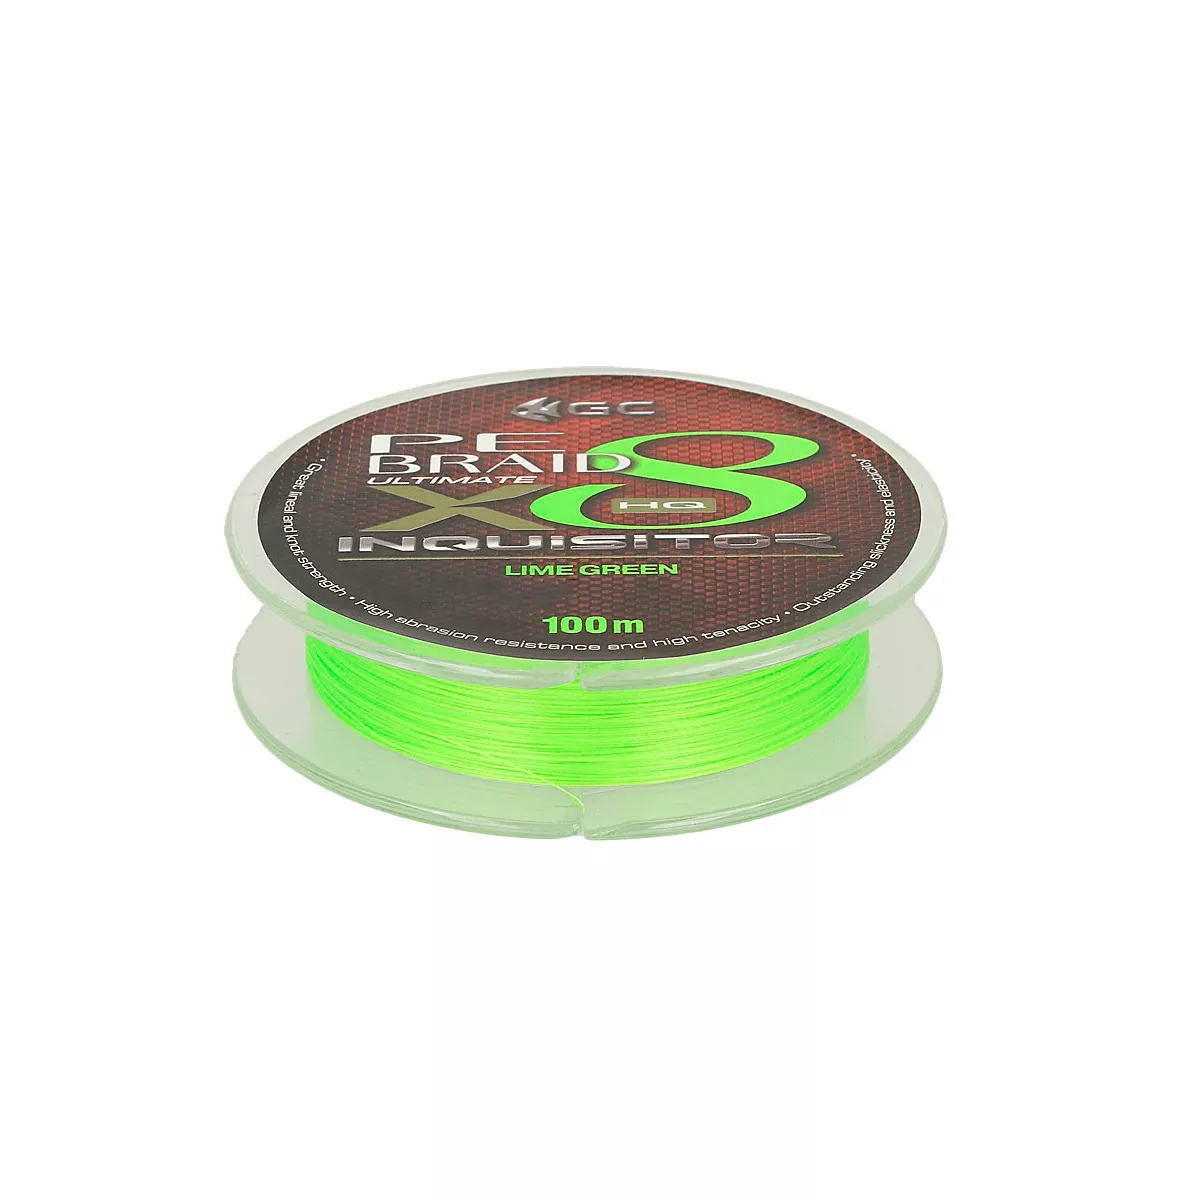 Golden Catch Braided Line Inquisitor PE X8 100m Lime Green